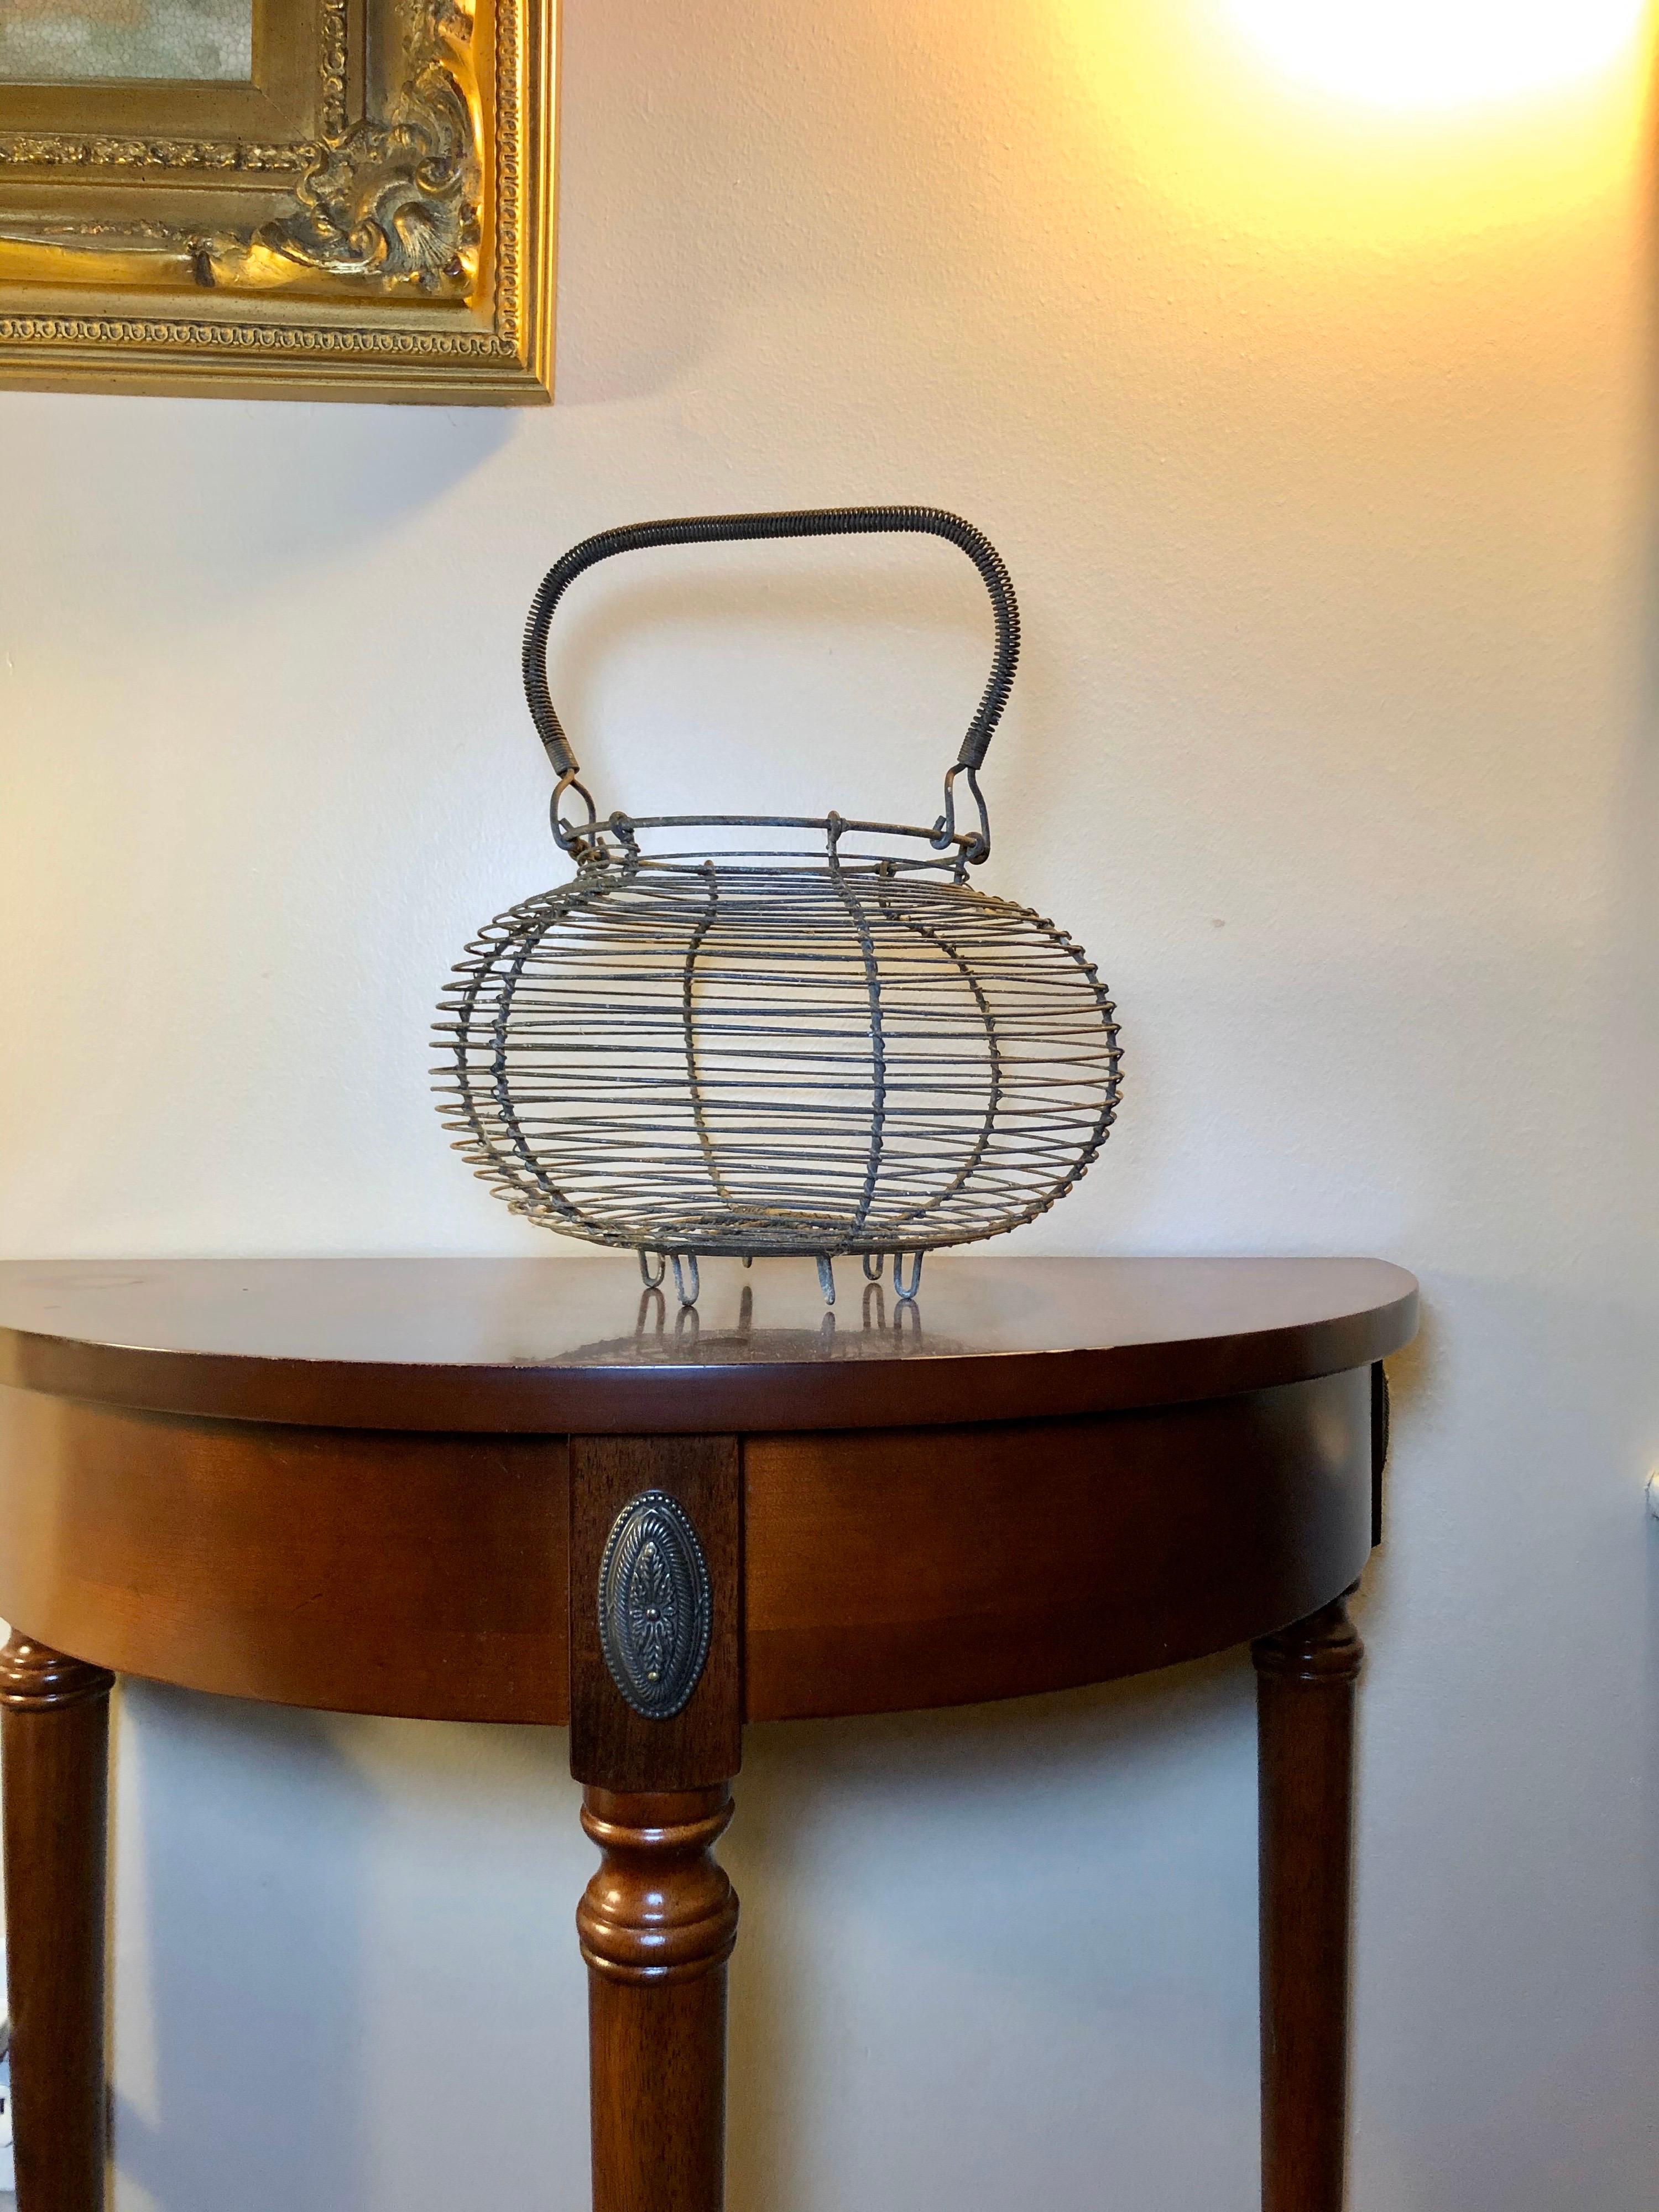 This classic French wire basket was traditionally used for collecting and storing eggs. The bulbous design is very pleasing, and makes an appealing silhouette with the coiled wire handle. Not too big, not too small. The metal is oxidized but strong